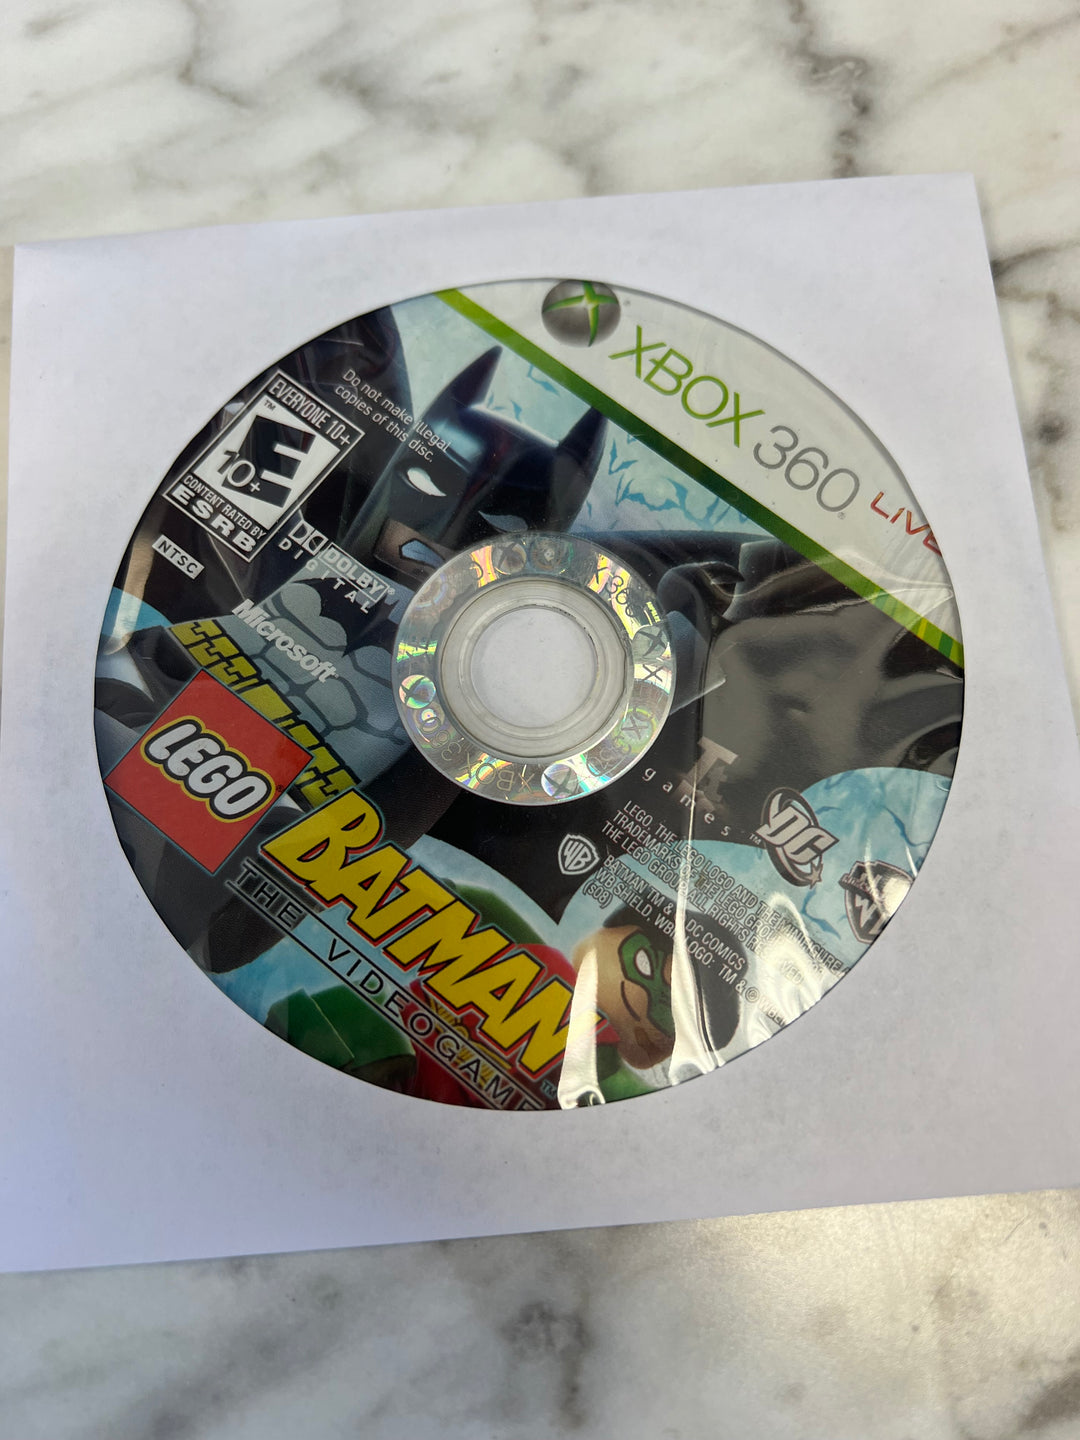 Lego Batman the Video Game for Xbox 360 Disc Only DU72124